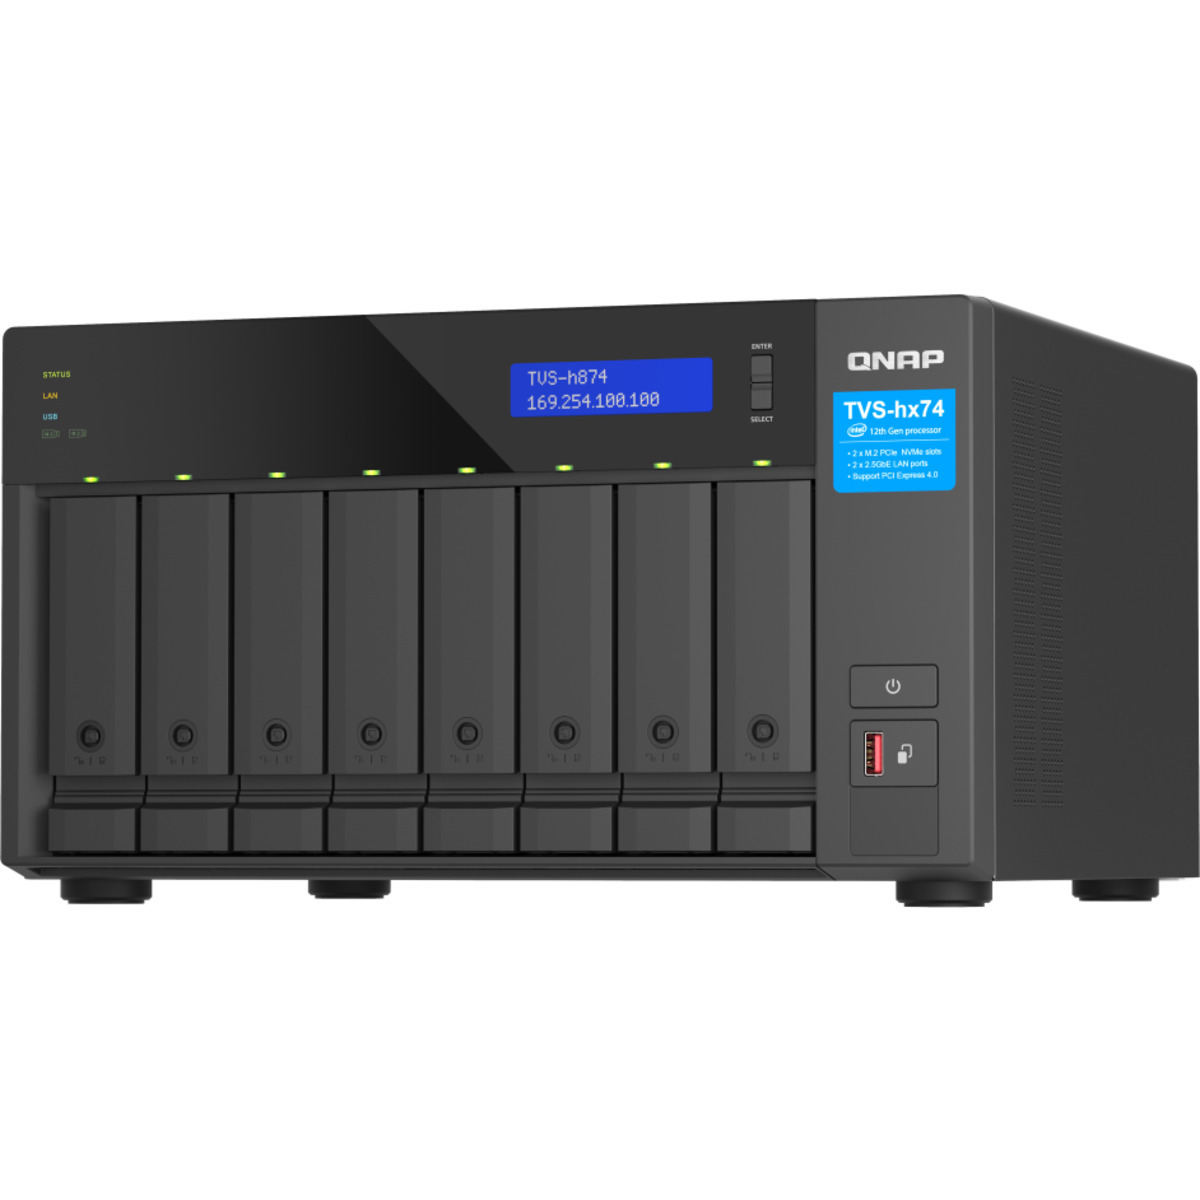 buy QNAP TVS-h874 Core i5 176tb Desktop NAS - Network Attached Storage Device 8x22000gb Seagate IronWolf Pro ST22000NT001 3.5 7200rpm SATA 6Gb/s HDD NAS Class Drives Installed - Burn-In Tested - nas headquarters buy network attached storage server device das new raid-5 free shipping simply usa TVS-h874 Core i5